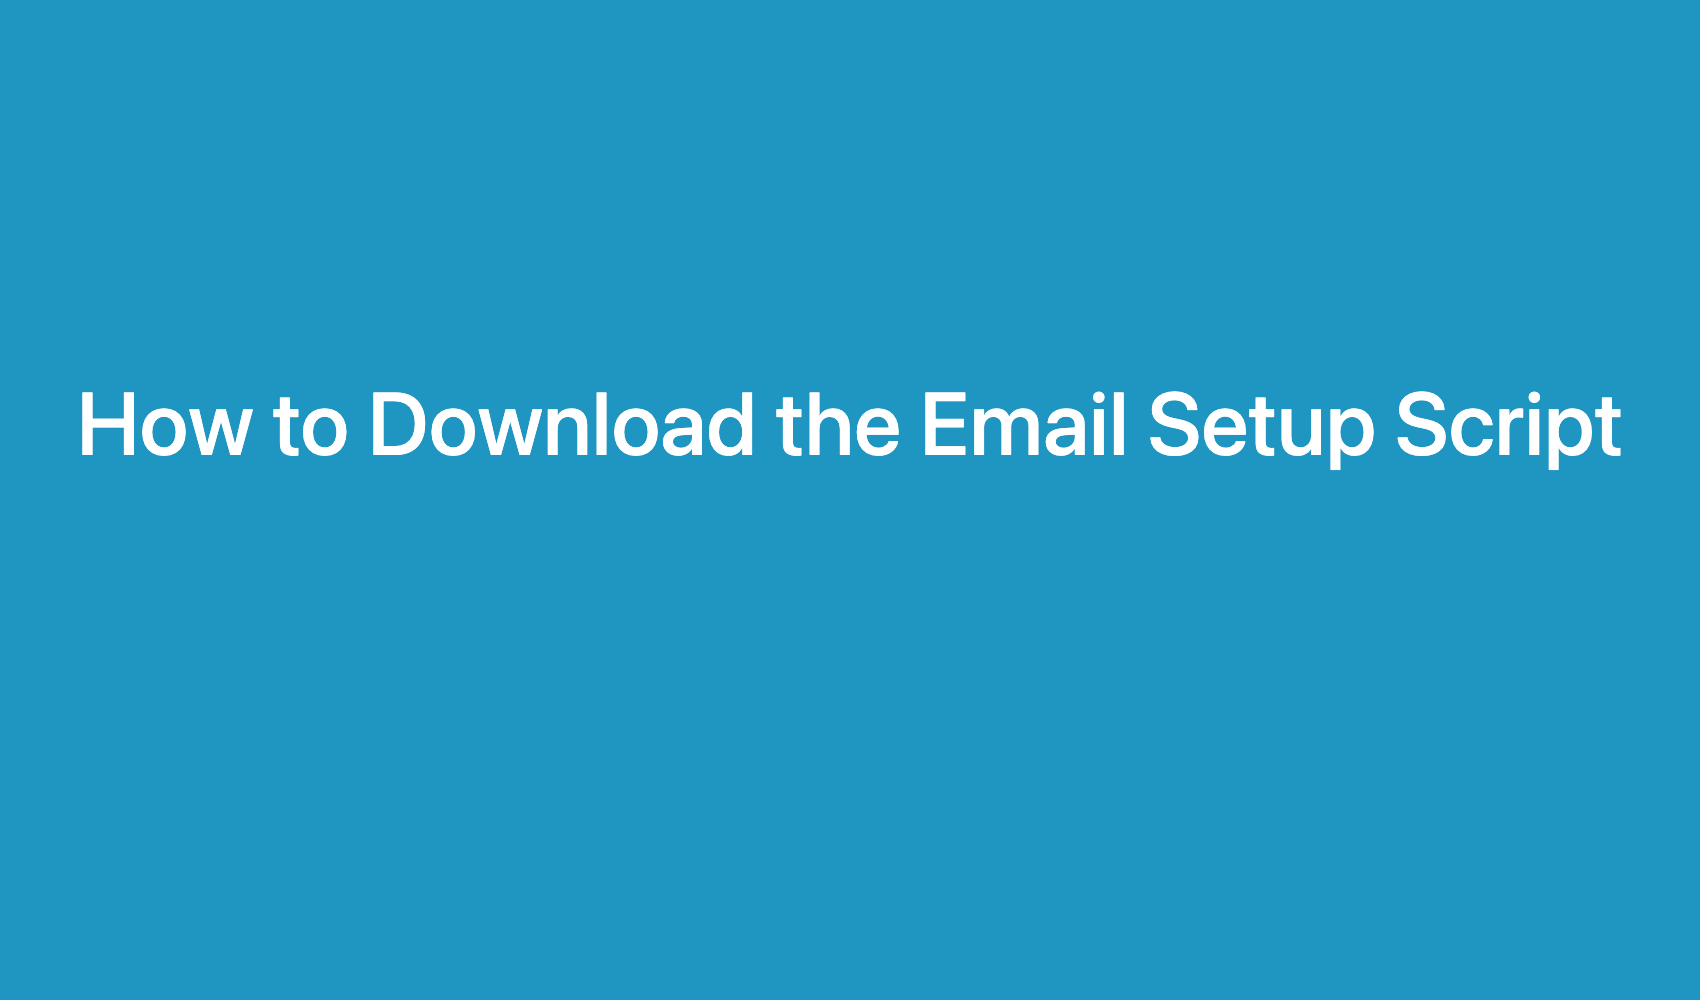 How To Download The Email Setup Script